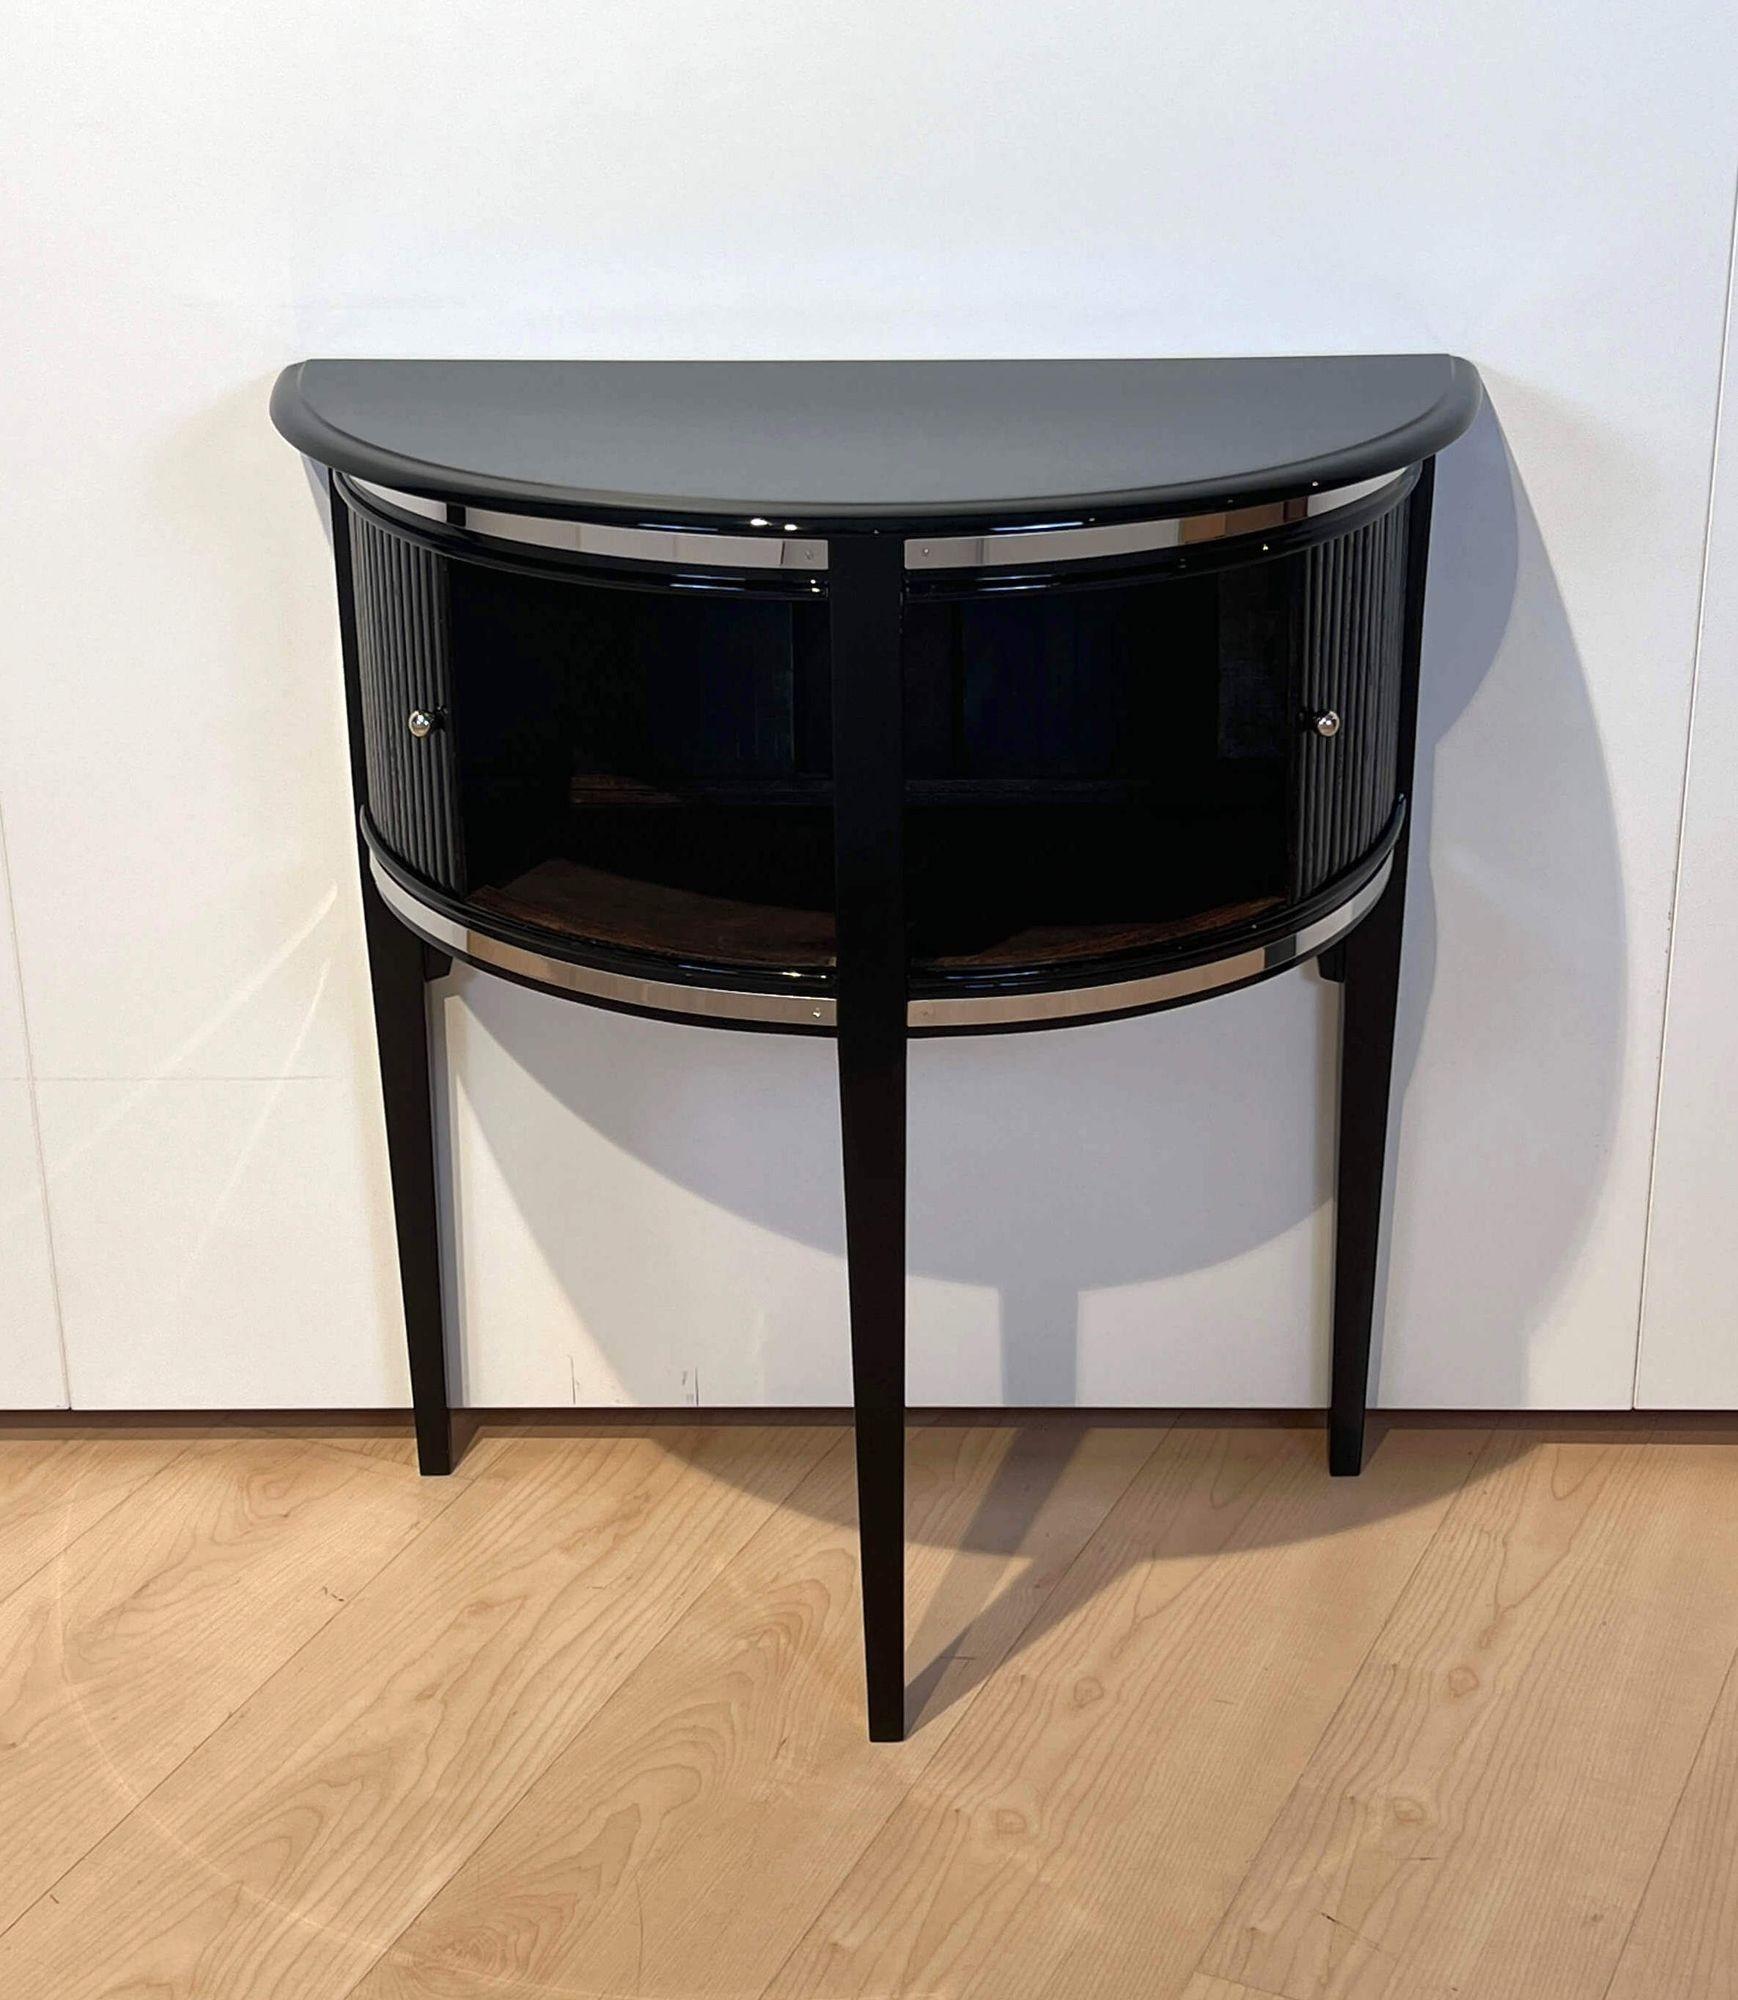 Oak, high gloss black lacquered and polished. Standing on three conical square legs.
Front with 2 sliding shutter doors (right side has been glued in the past and stucks a bit, but is working). Polished stainless steel trim.
 
Dimensions: H 72 cm